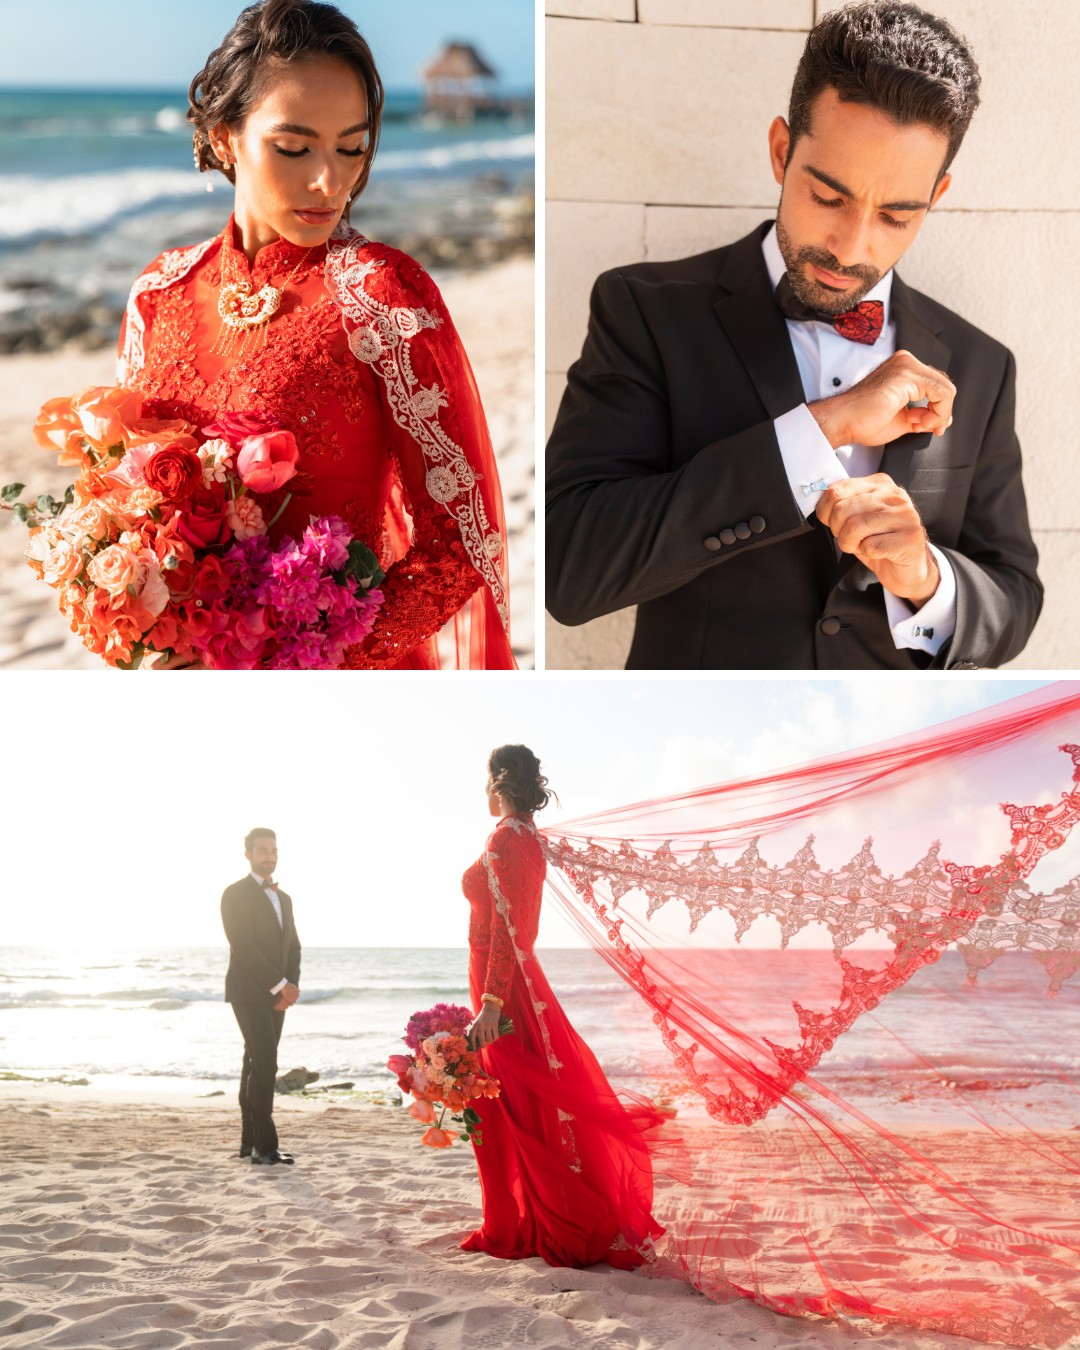 Bride and Groom in beach wedding in red dress